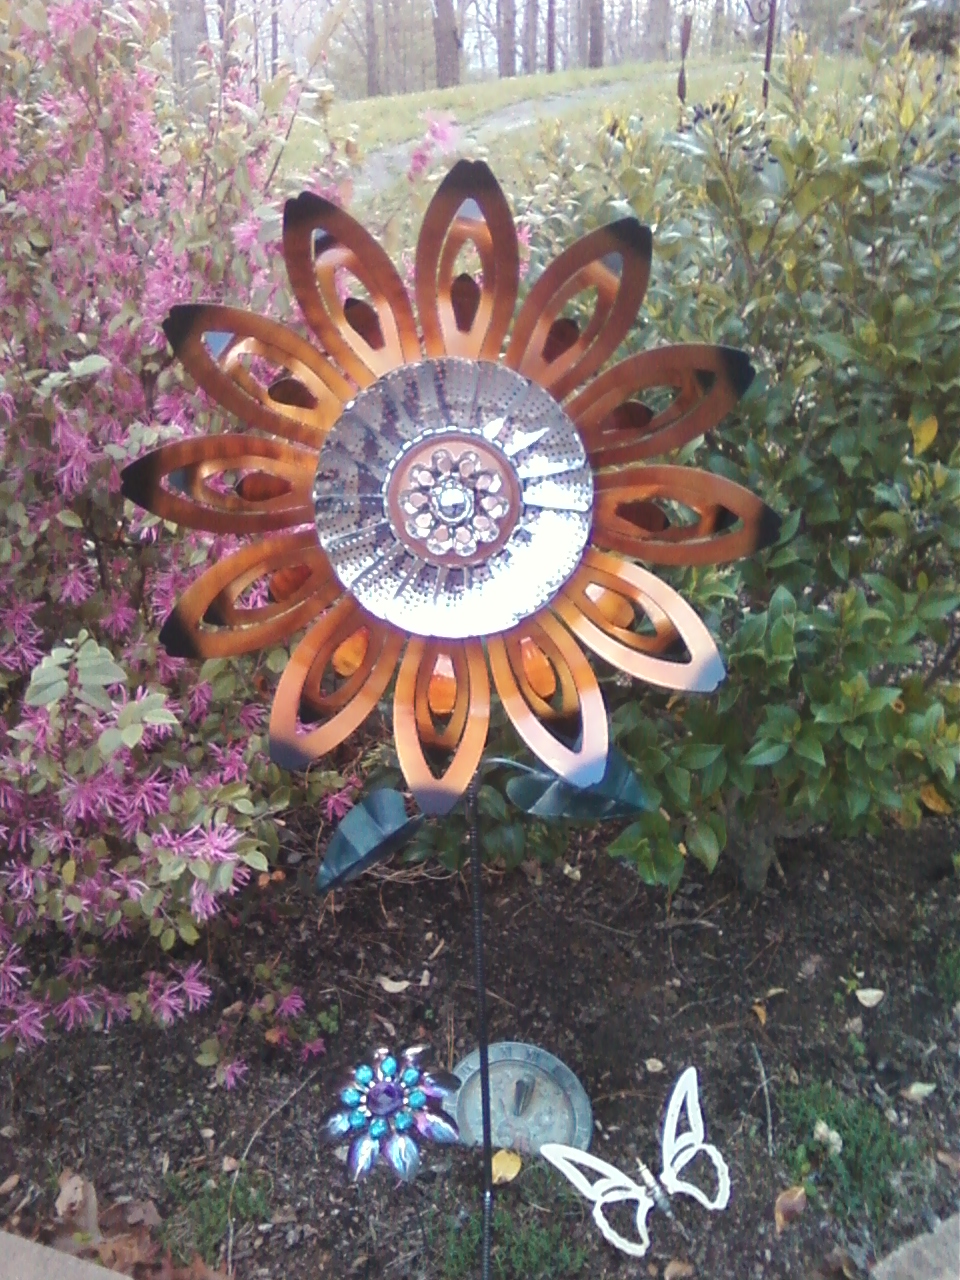 Ex Lg Painted Stainless Flower Yard Art